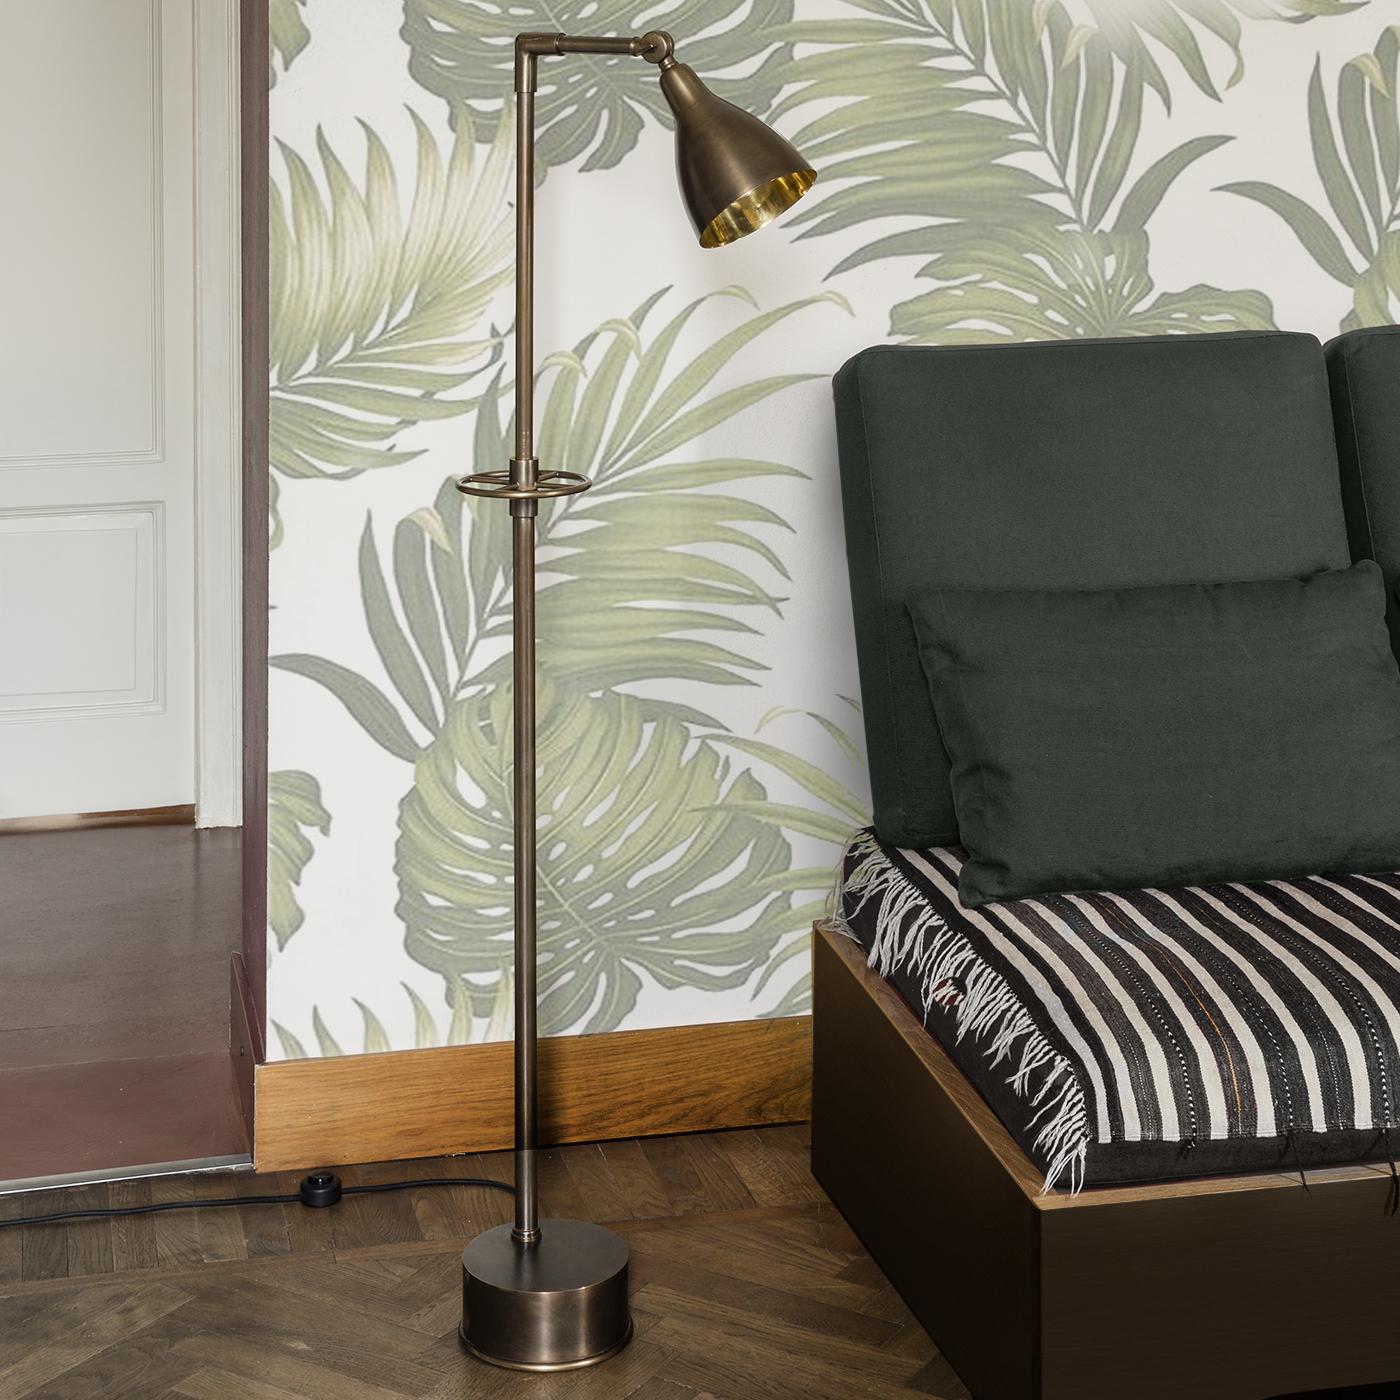 A perfect example of simplicity meeting functionality, this midcentury floor lamp has a solid burnished brass structure with a satin finish and a bell-shaped shade with a natural-finished interior that diffuses a warm, ambient light. Stretching out